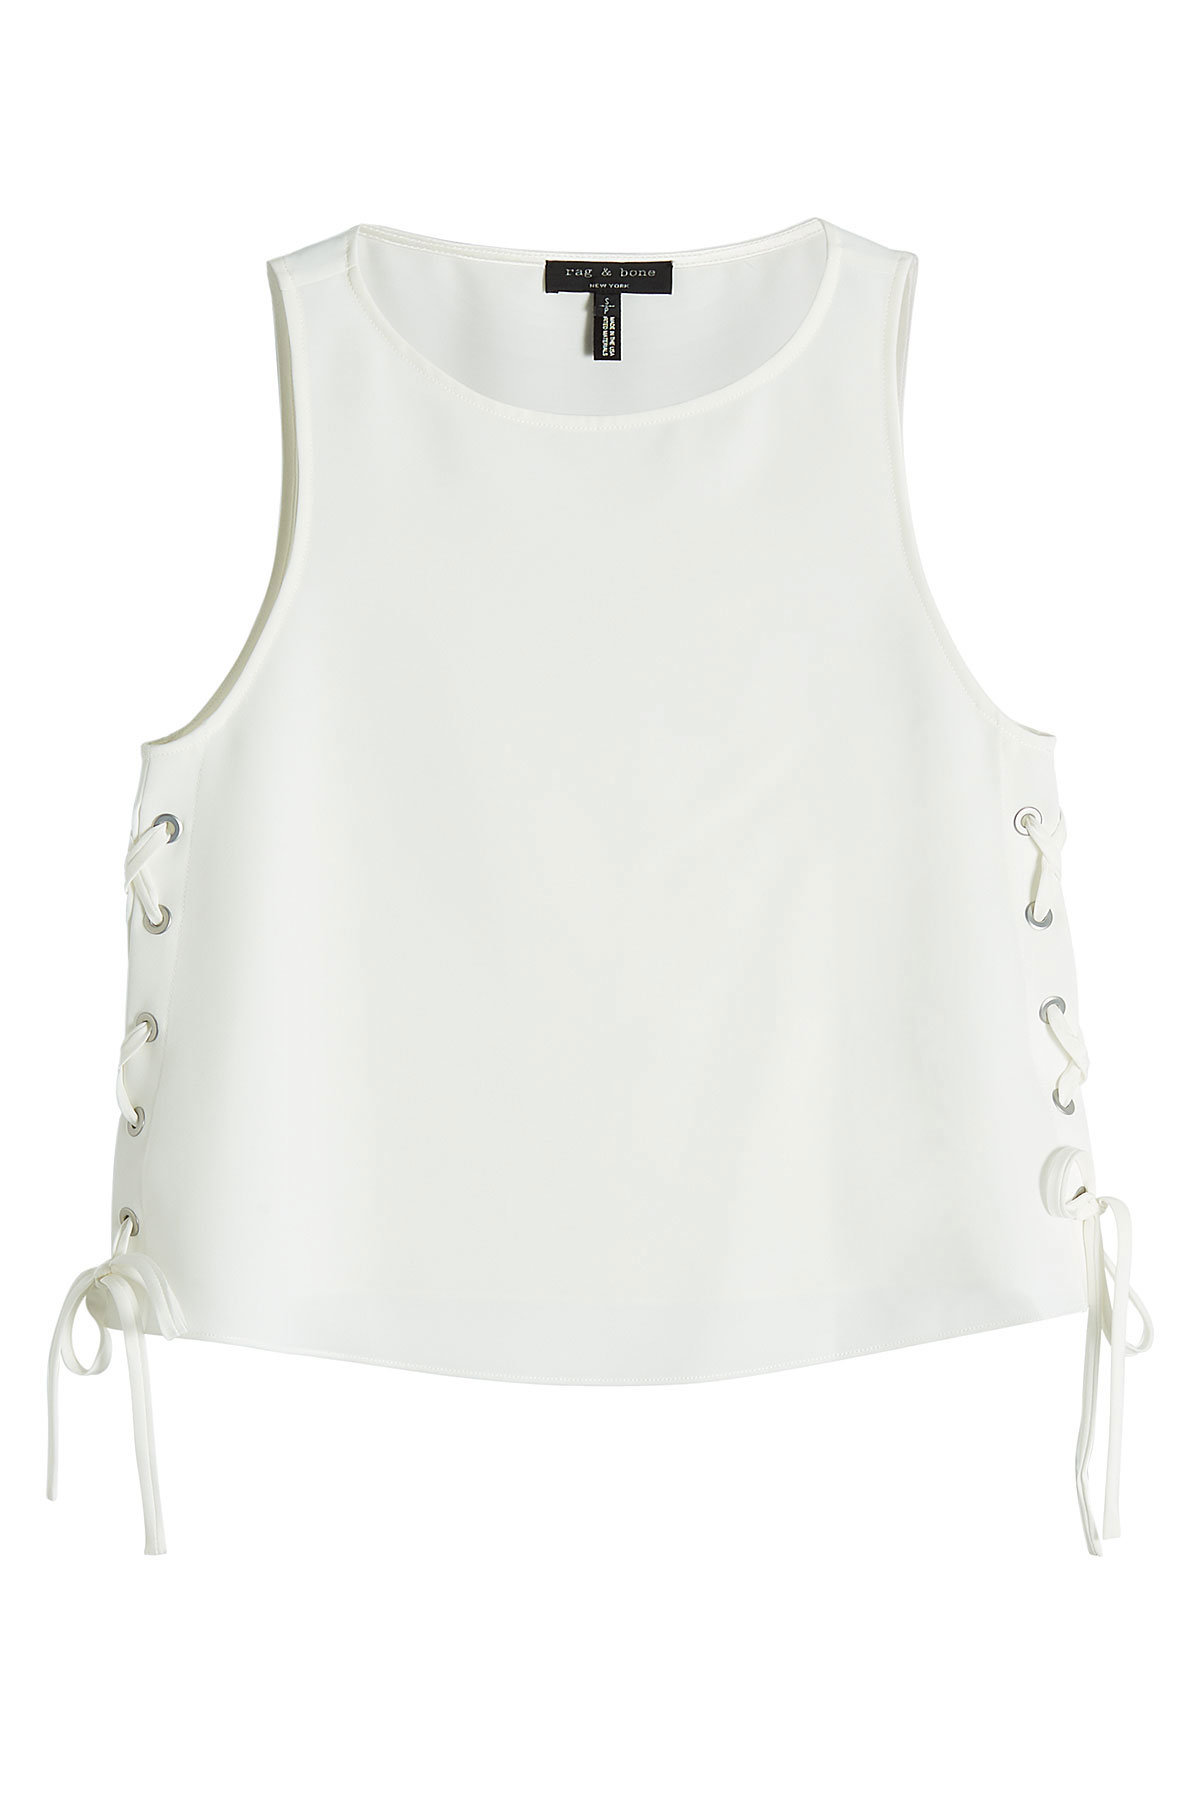 Rag & Bone - Crepe Top with Lace-Up Sides